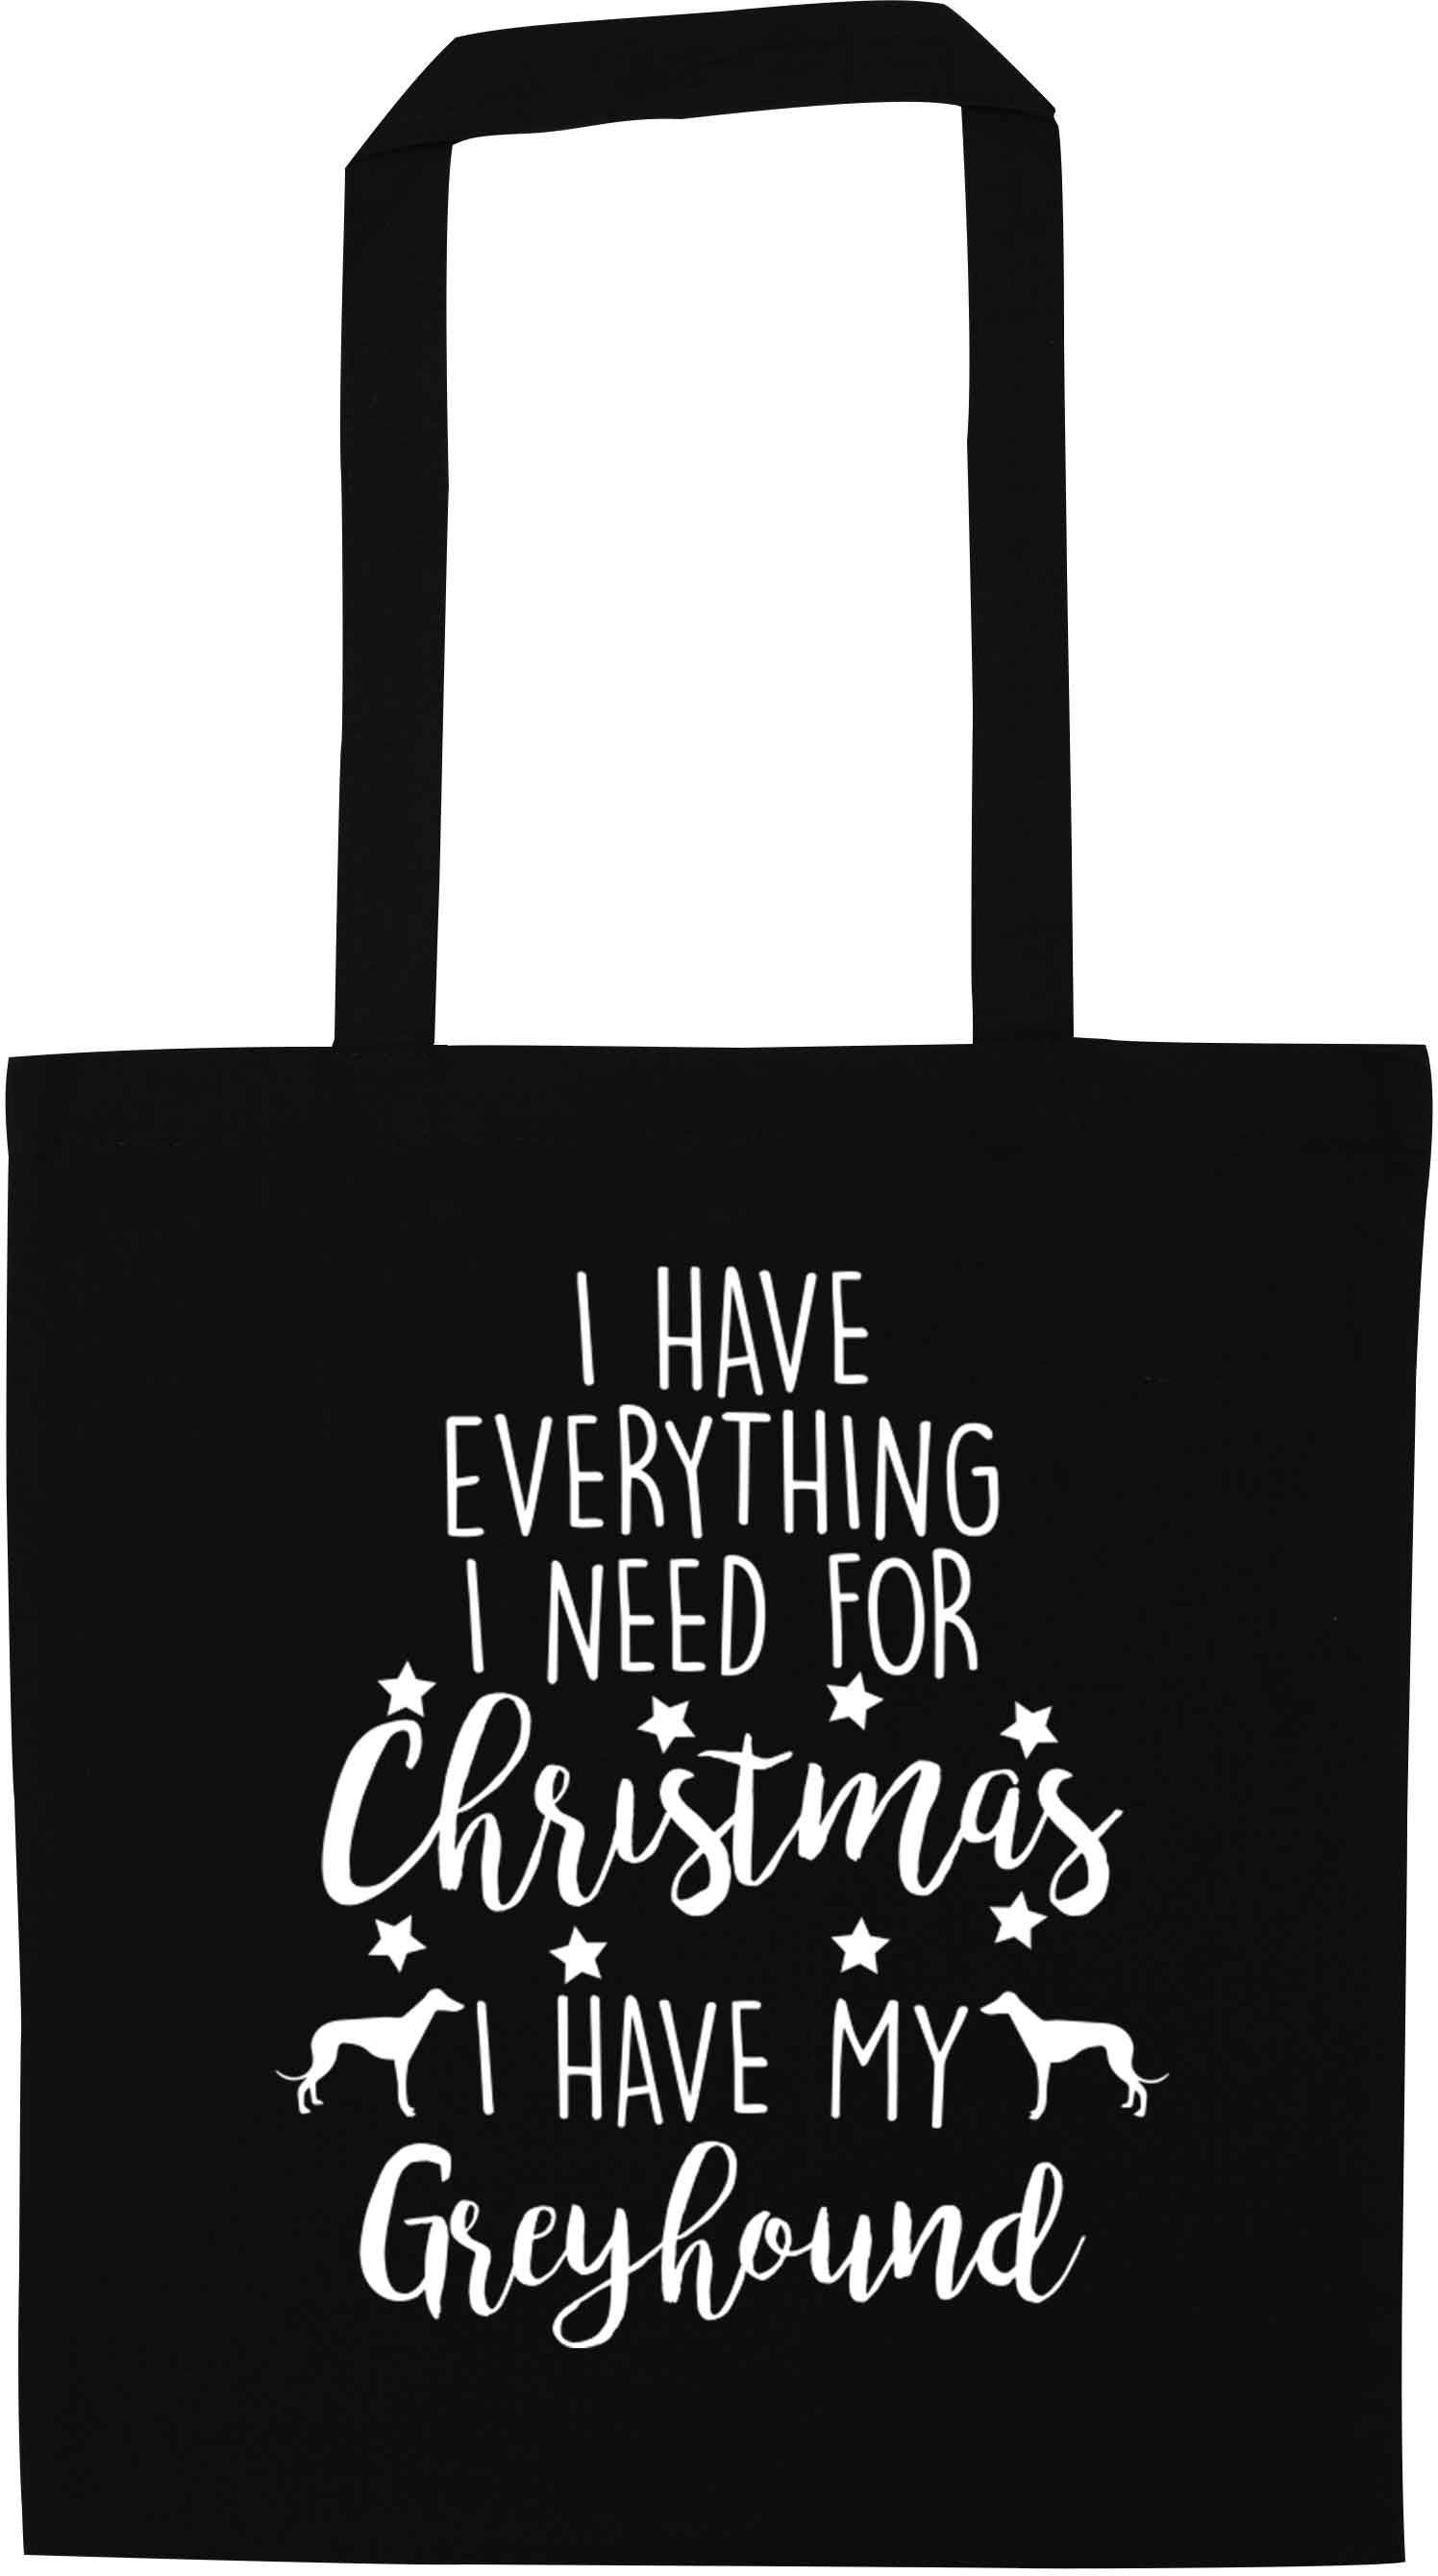 I have everything I need for Christmas I have my greyhound black tote bag